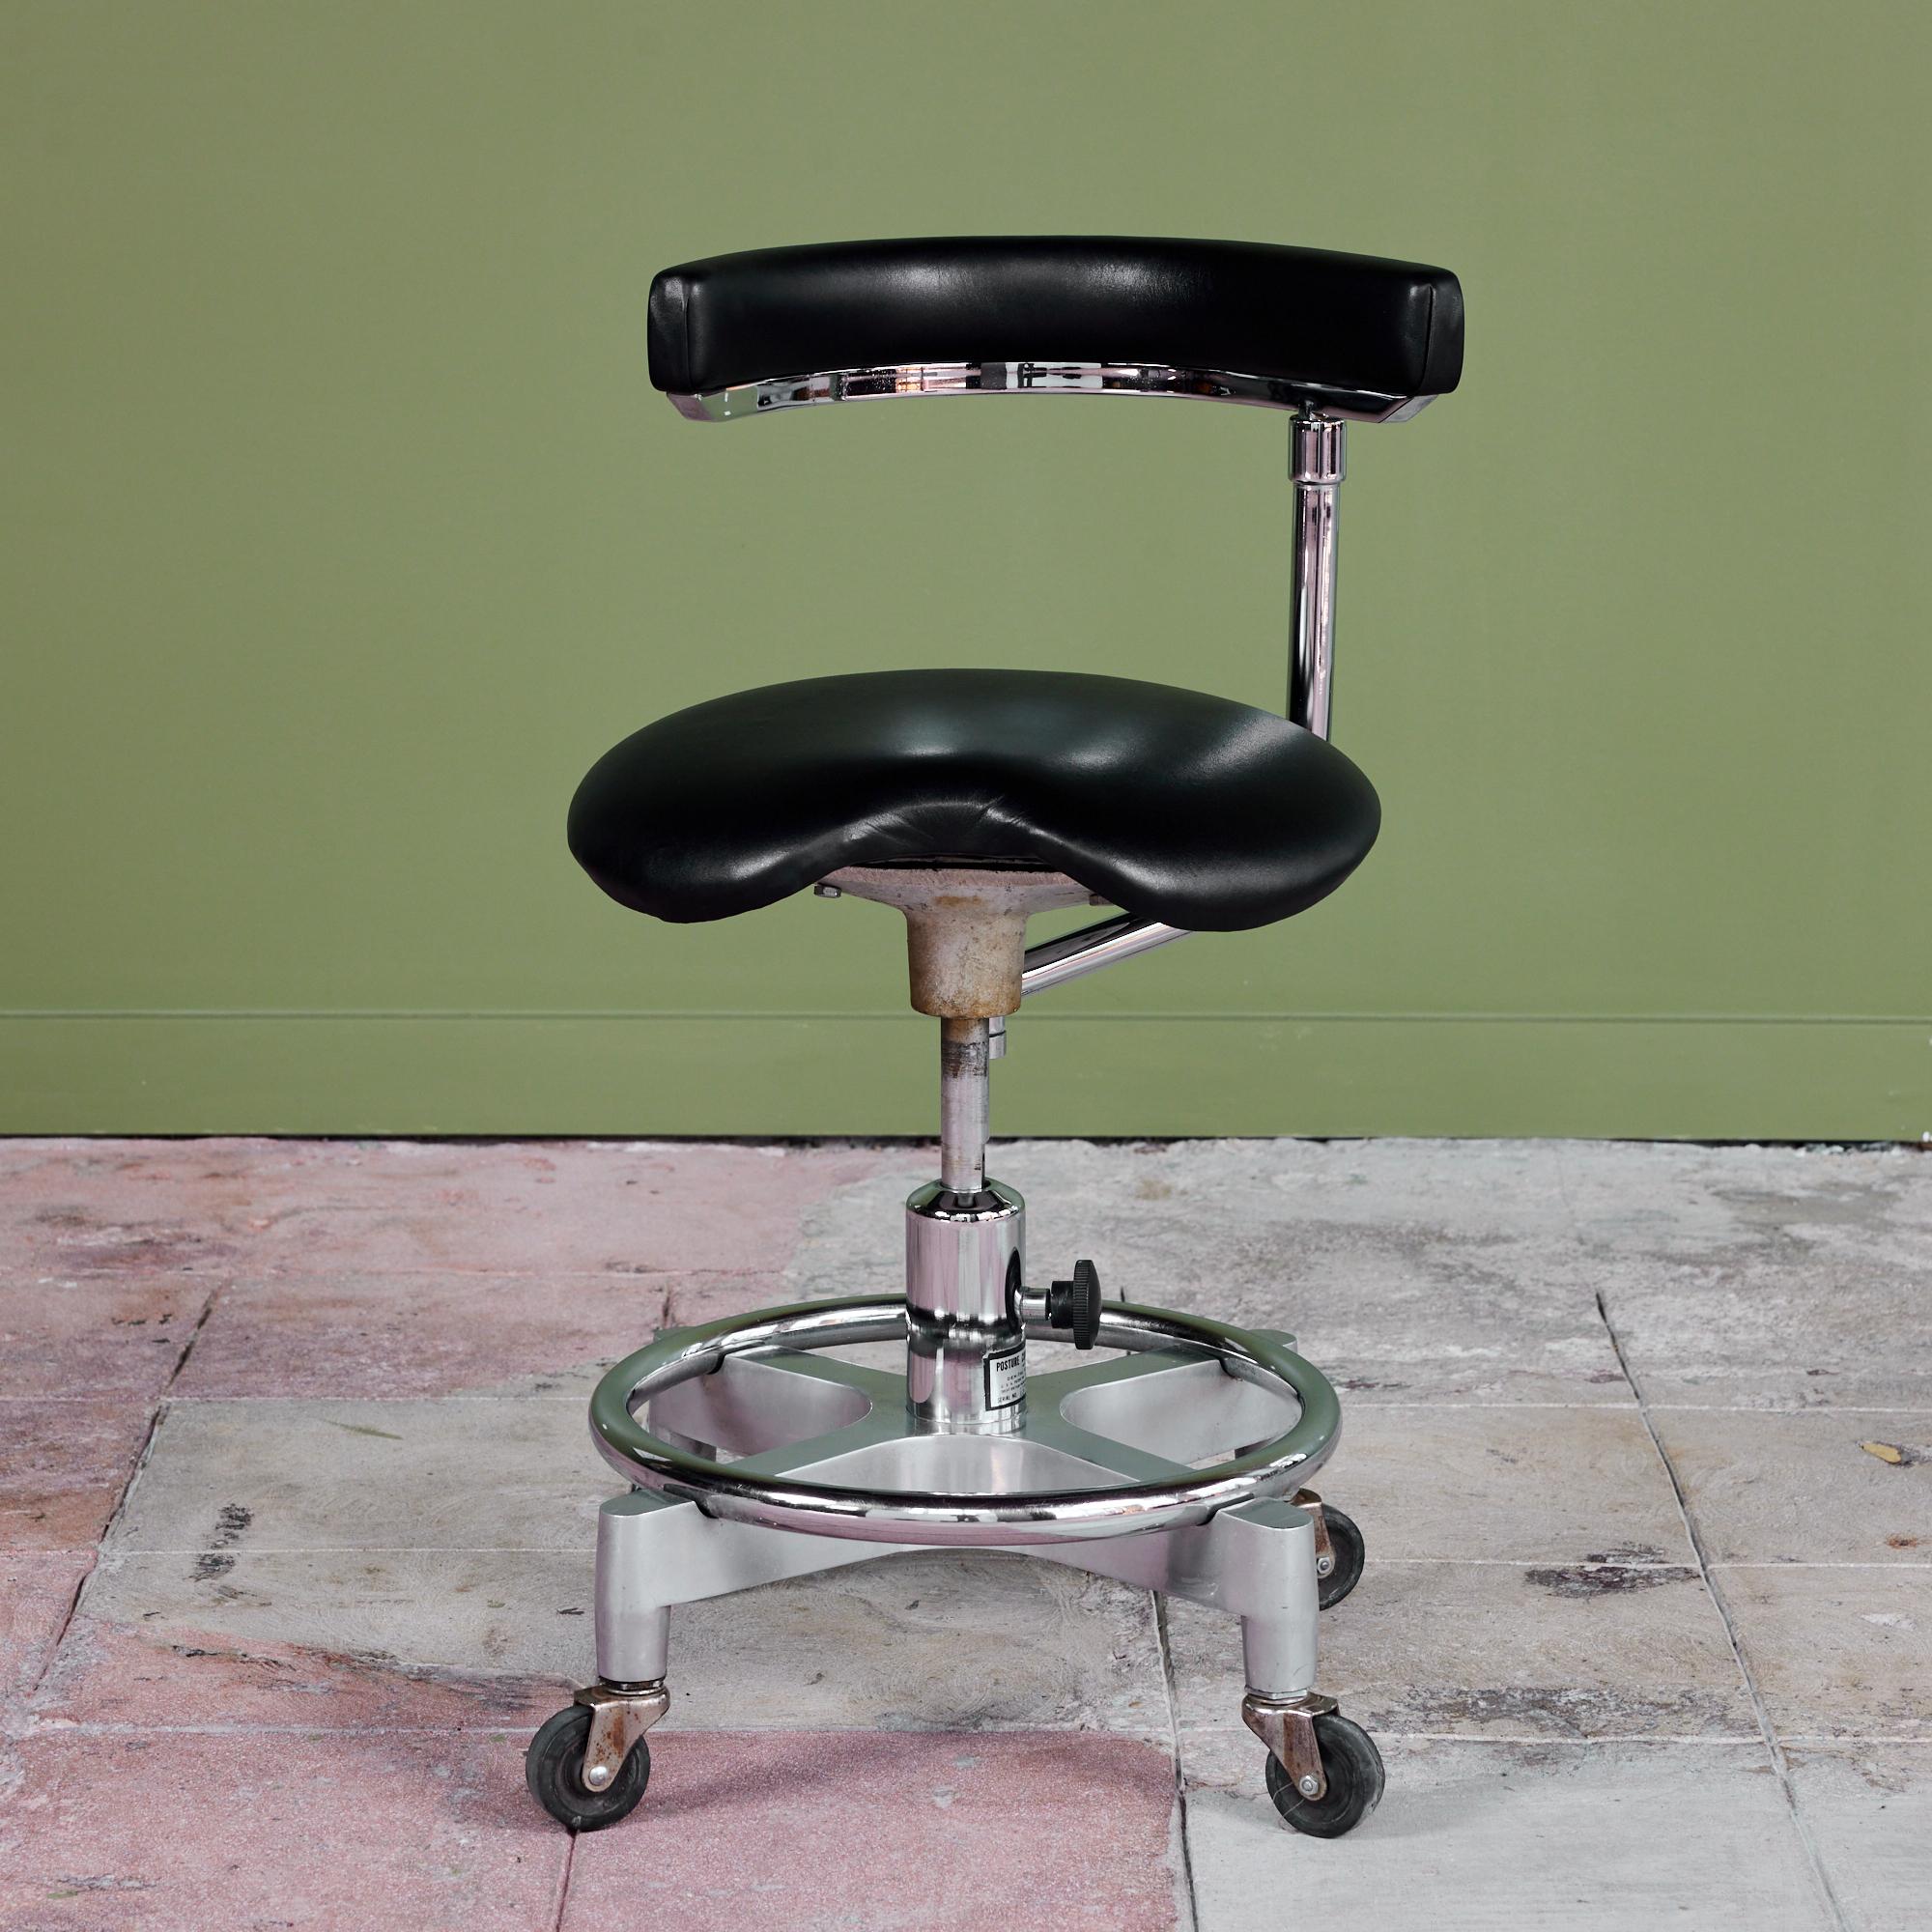 Adjustable chair by Den-Tal patented,1951 in the USA. This chair, originally intended for a dental office also doubles as a perfect office or accent chair. Dubbed the 